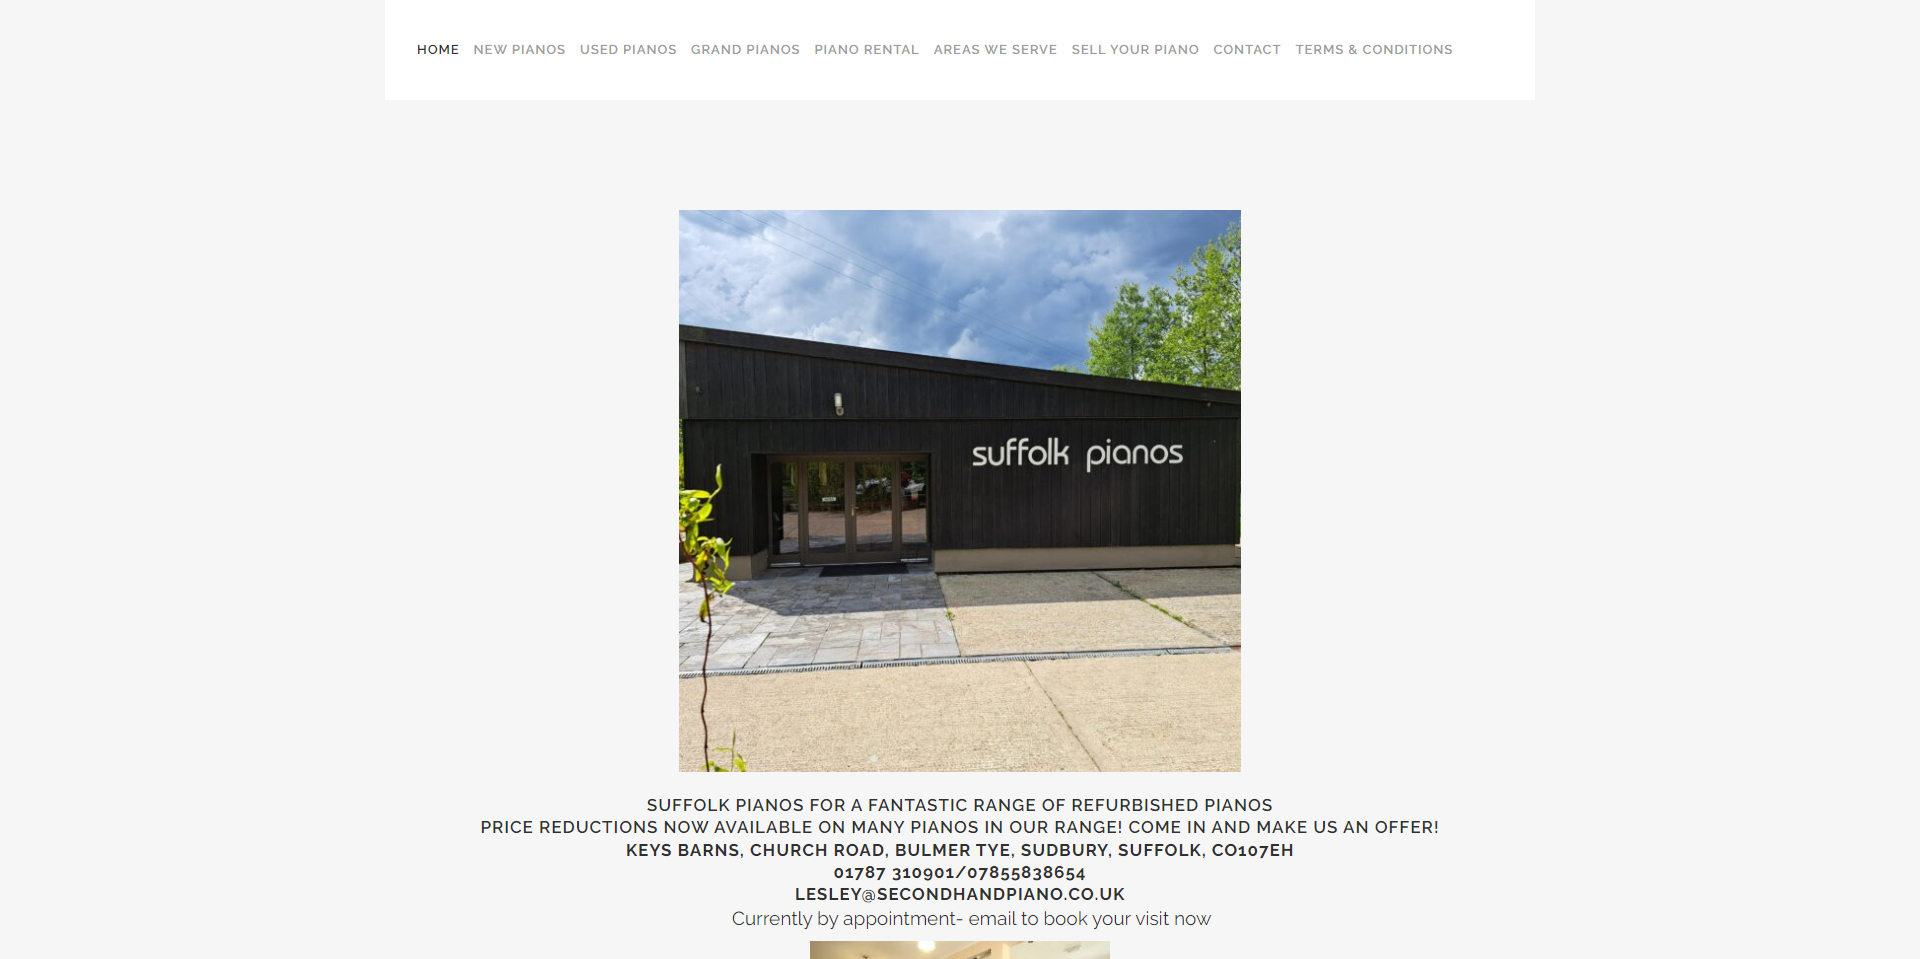 The old Suffolk Piano's website